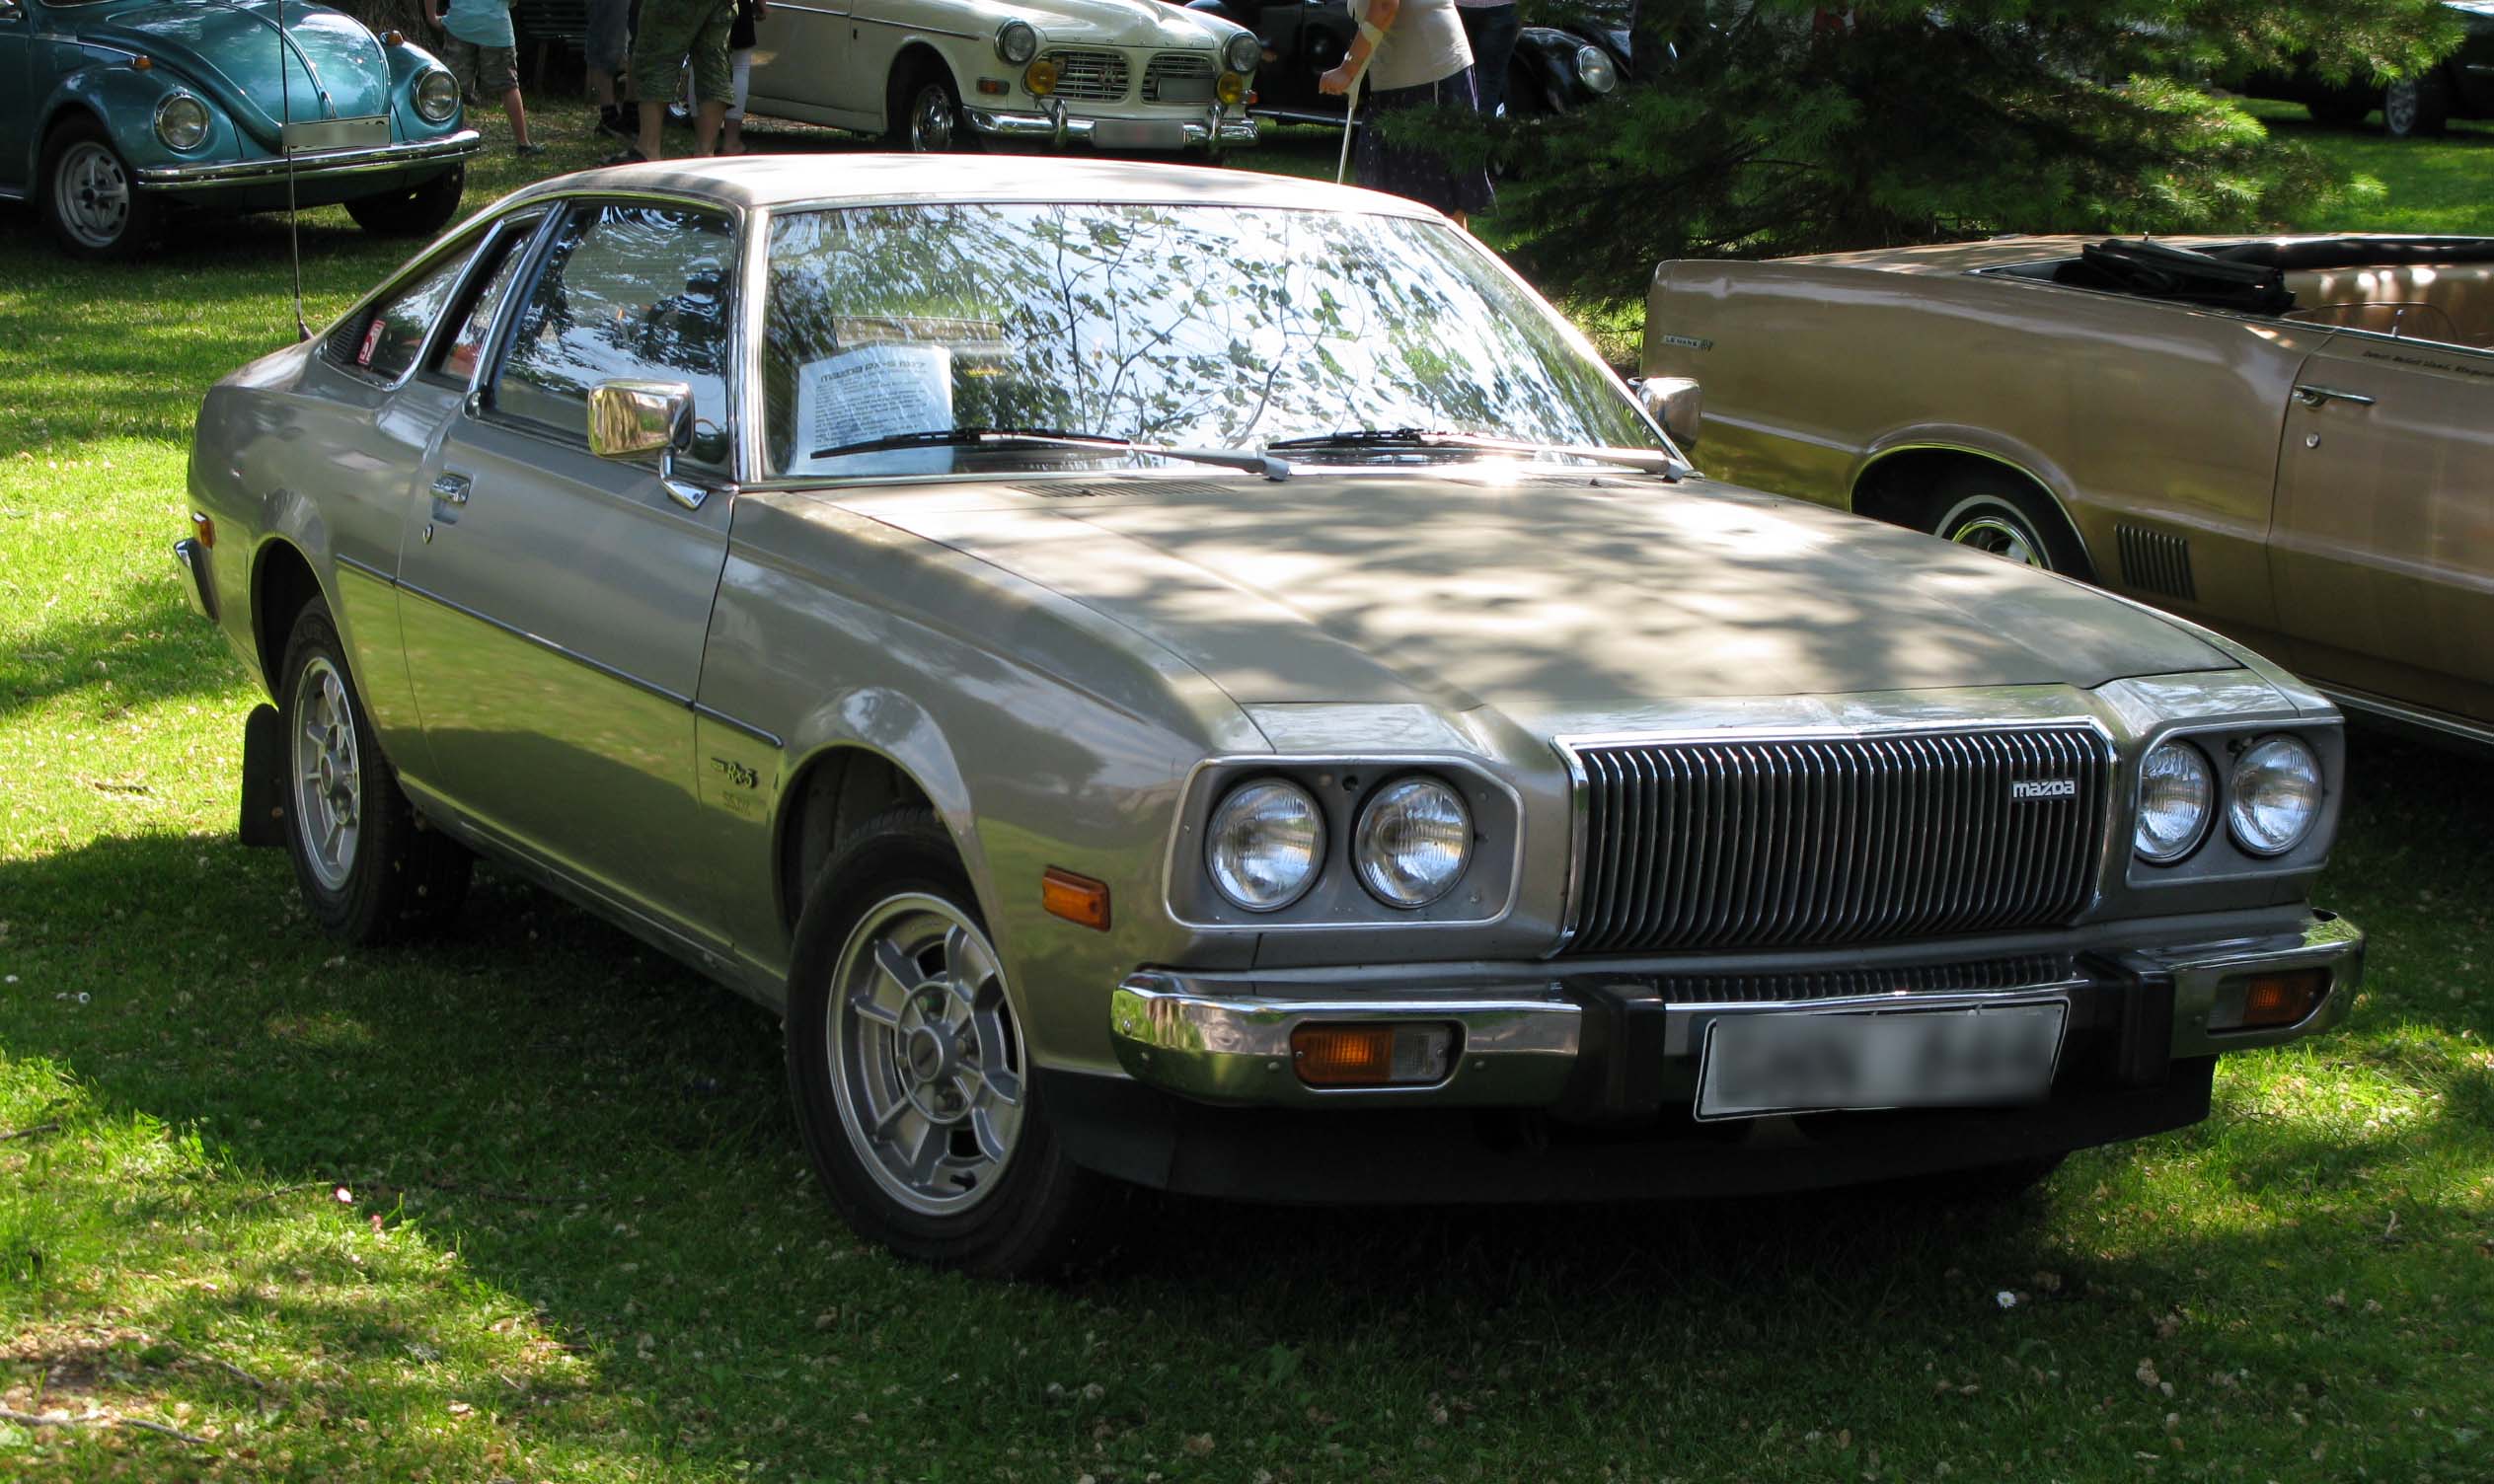 File:1977 Mazda RX-5 front.jpg - Wikimedia Commons